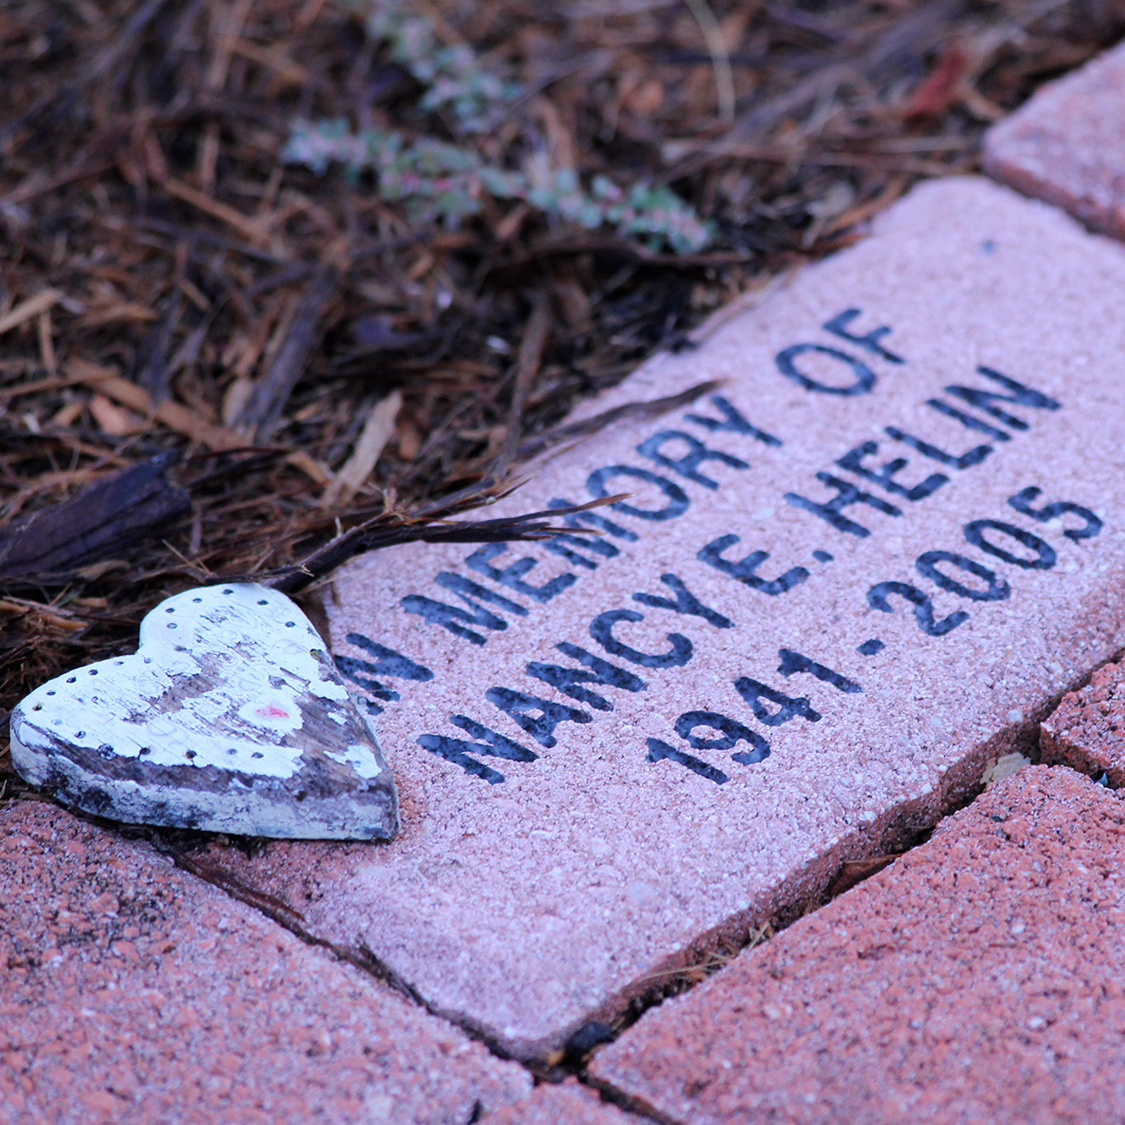 Memorial Heart with Inclusion, Remembrance Gift